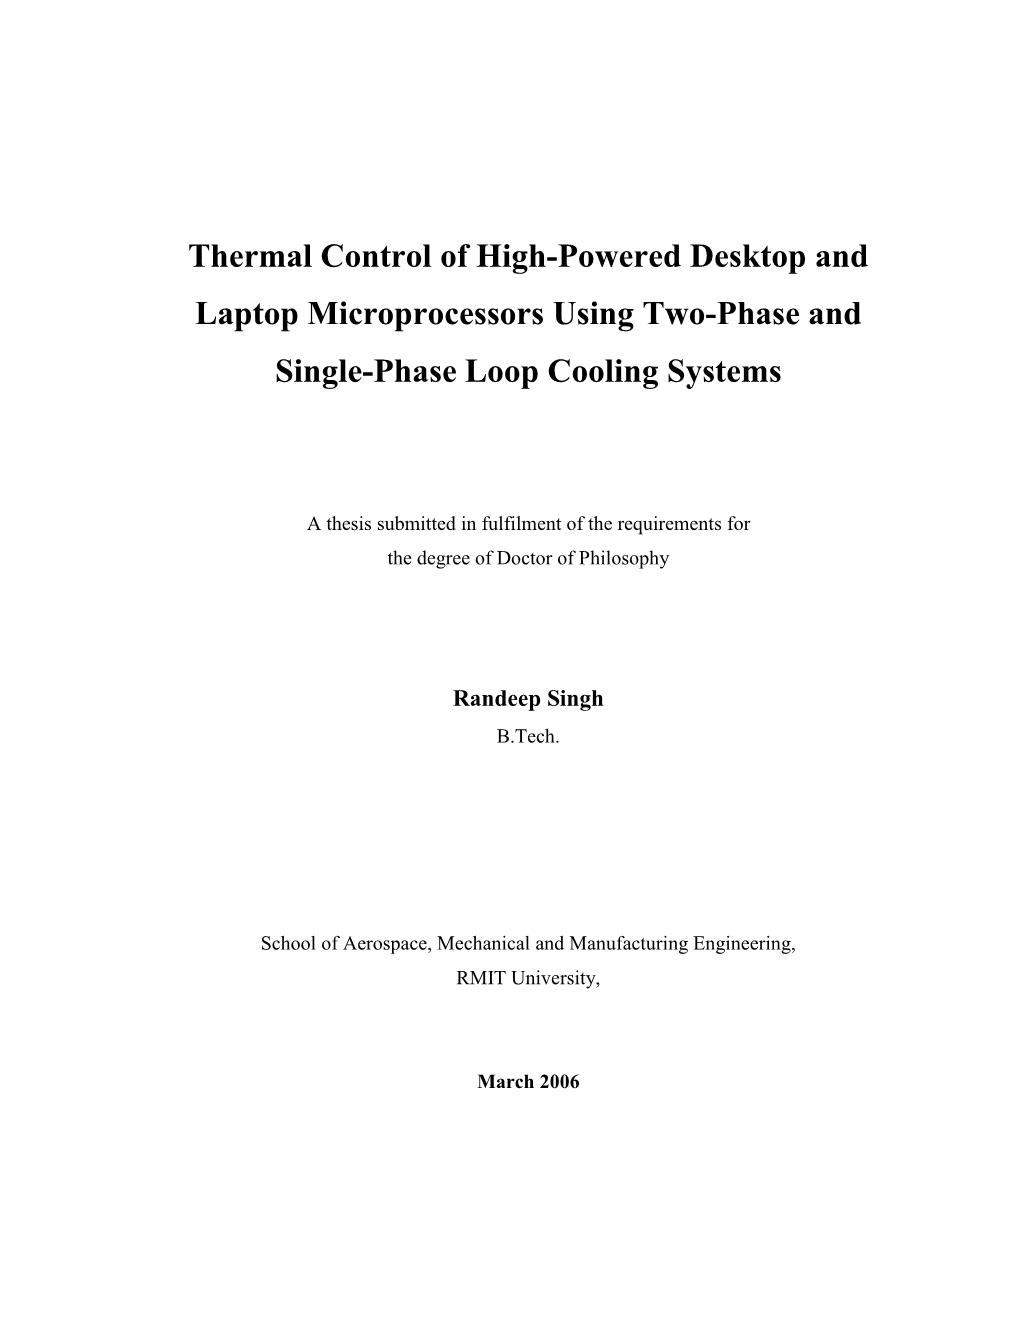 Thermal Control of High-Powered Desktop and Laptop Microprocessors Using Two-Phase and Single-Phase Loop Cooling Systems